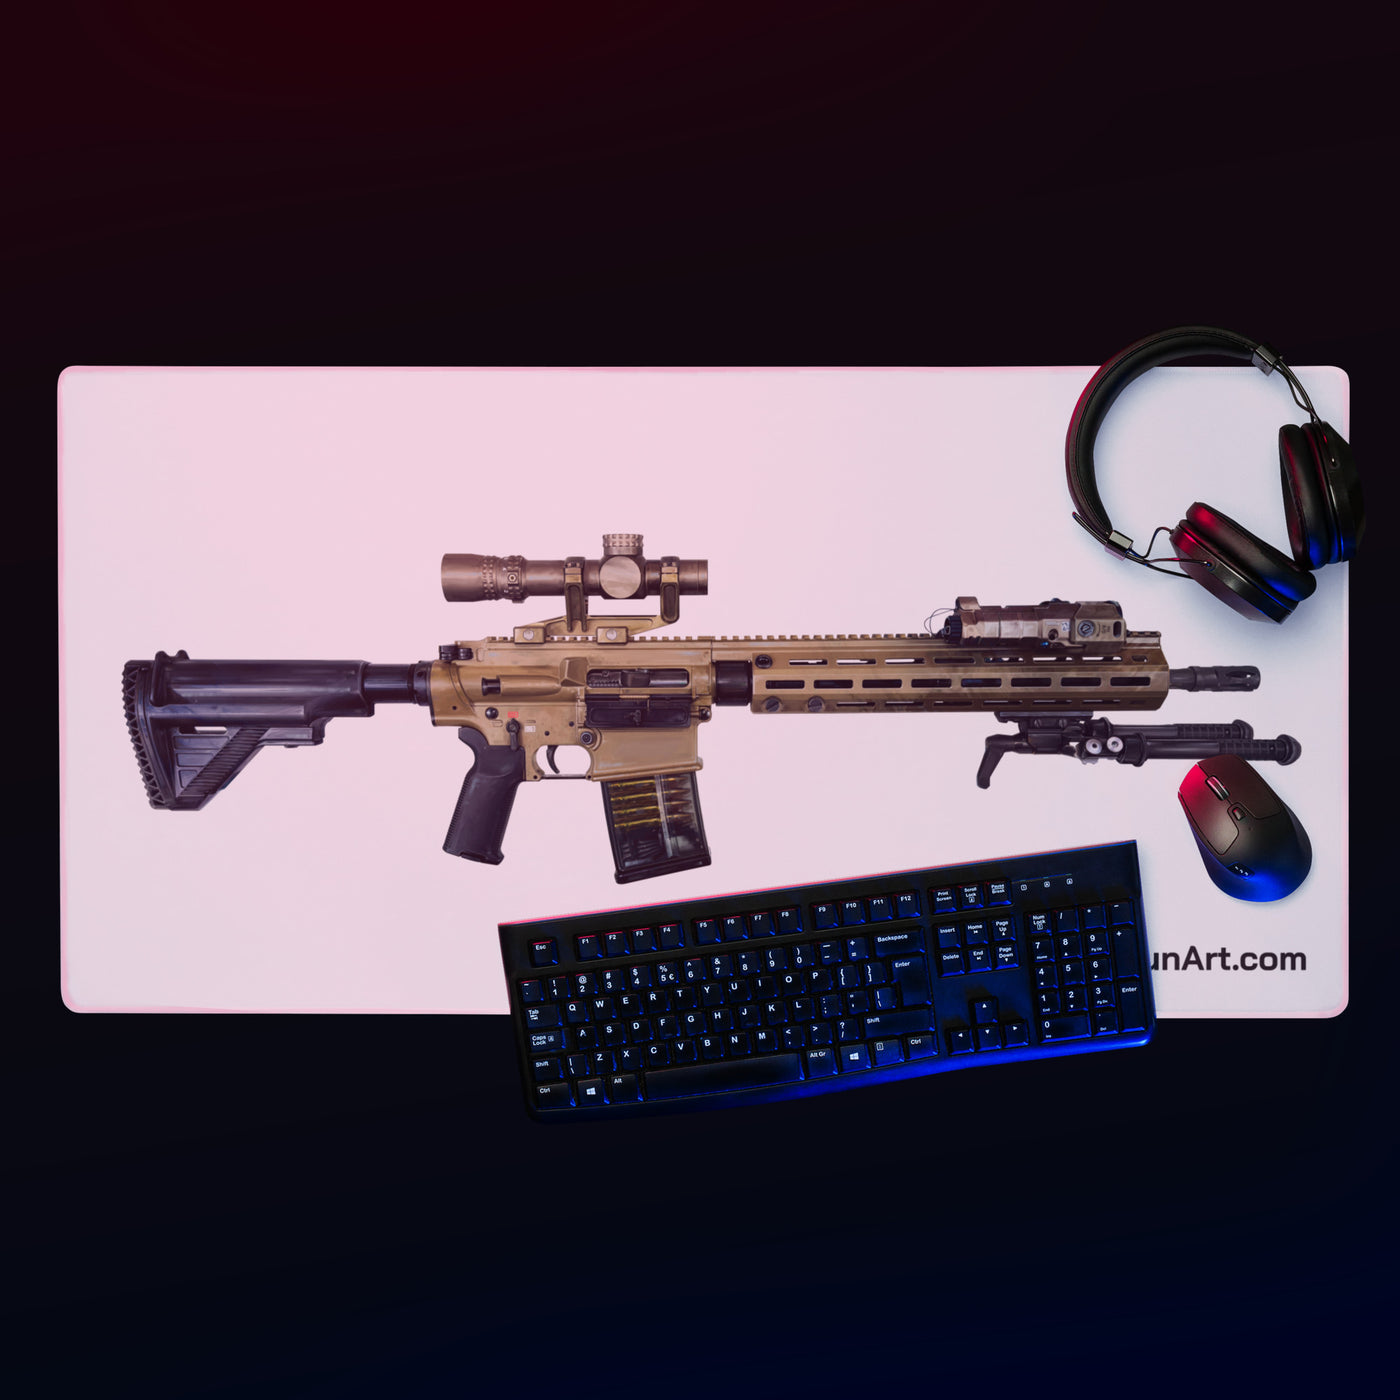 German 7.62x51mm AR10 Battle Rifle Gaming Mouse Pad - Just The Piece - White Background